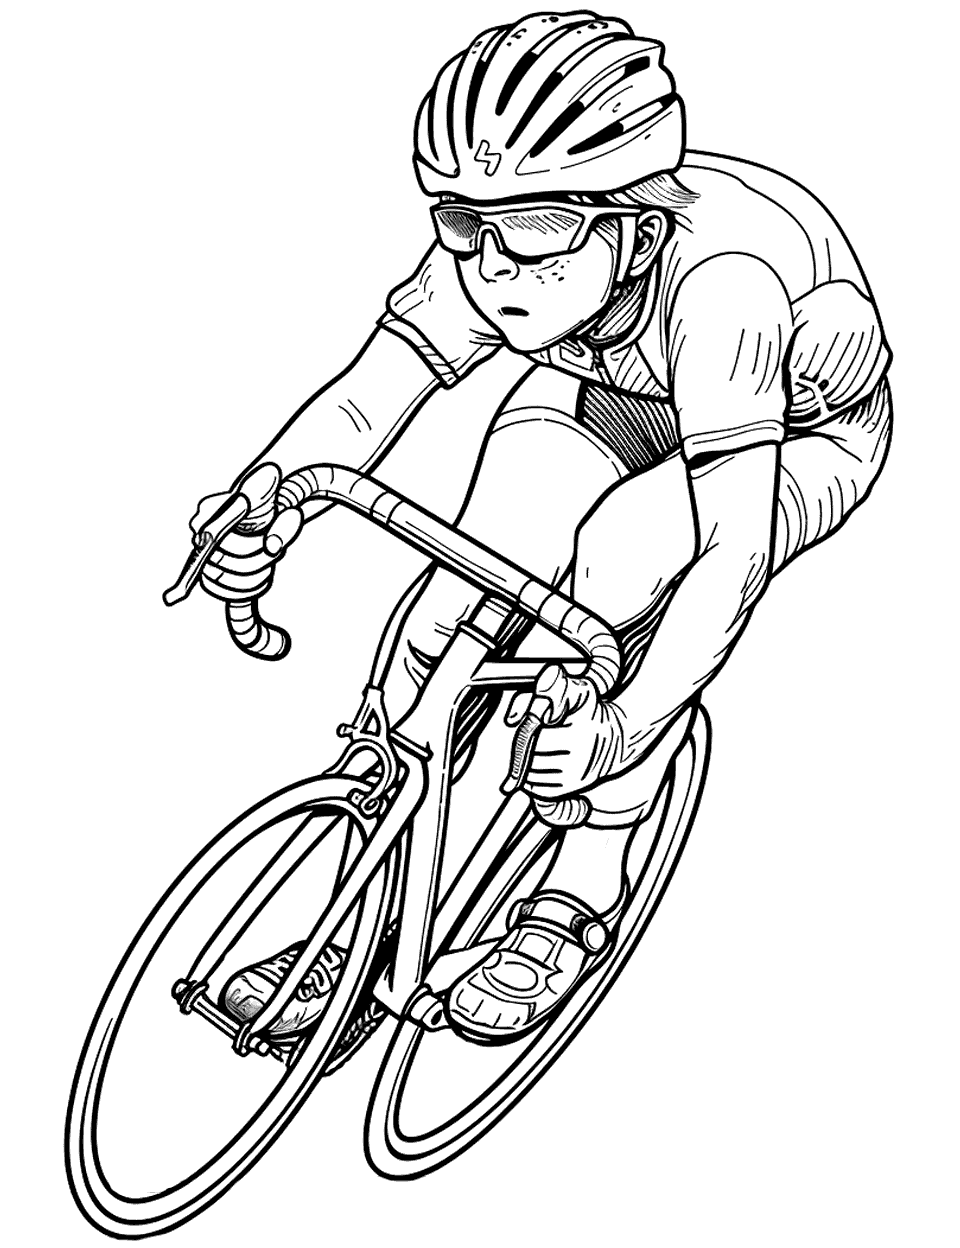 Cycling Race Sports Coloring Page - A Cyclist with full race gear and sports cycle racing for victory,